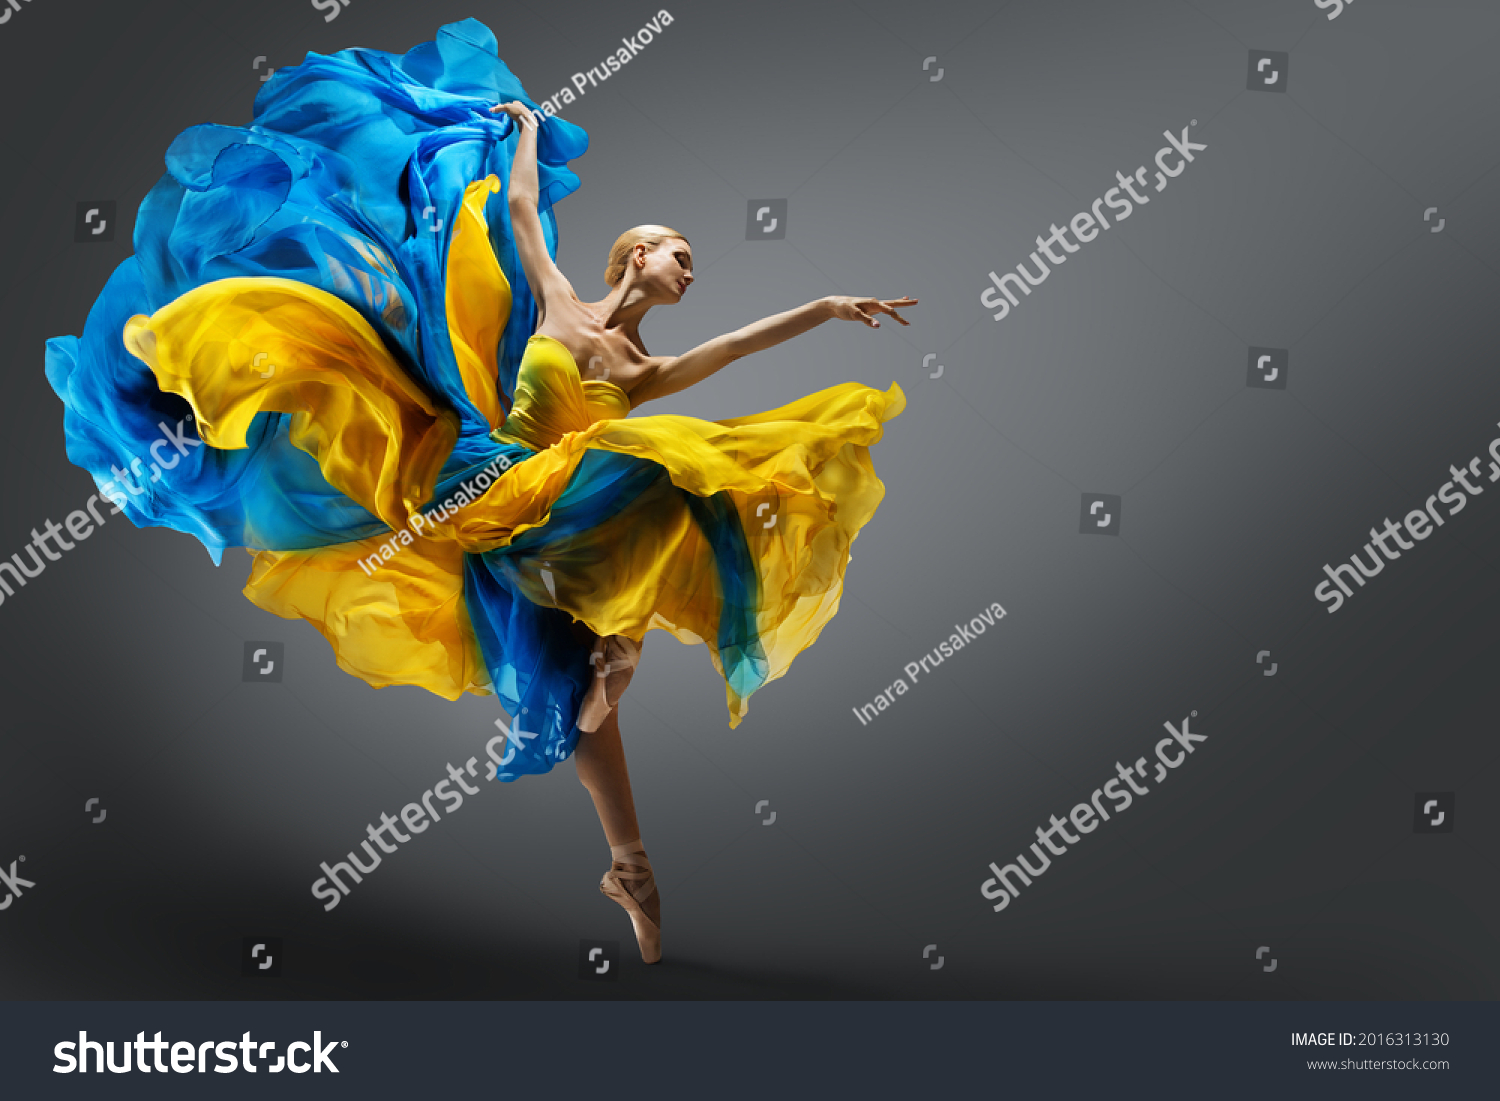 Beautiful Woman Ballet Dancer Jumping in Air in Colorful Fluttering Dress. Graceful Ballerina Dancing in Yellow Blue Gown over Gray Studio Background #2016313130